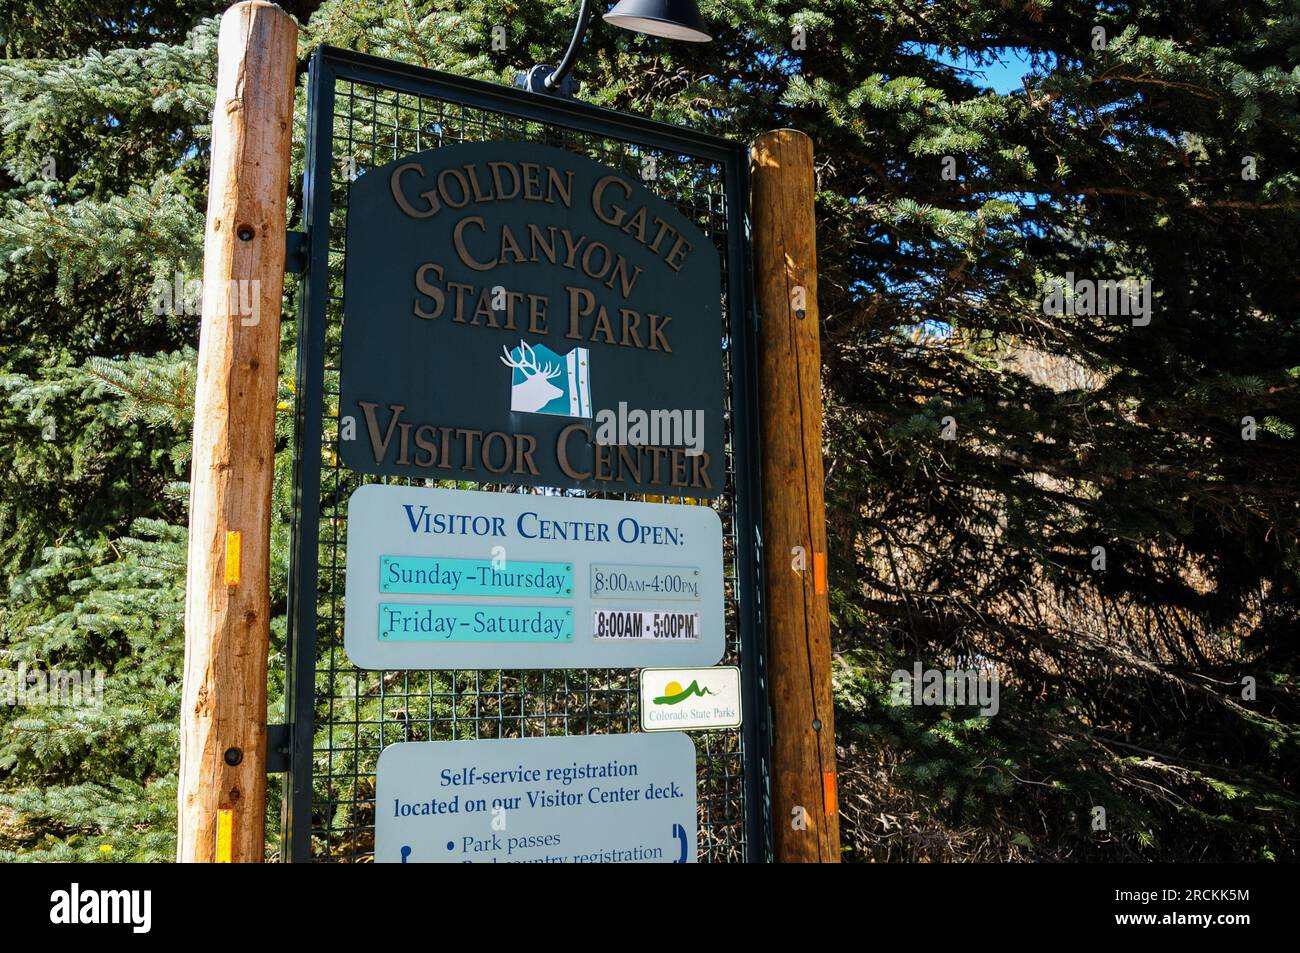 Entrance sign at Golden Gate Canyon State Park in Colorado, USA Stock Photo